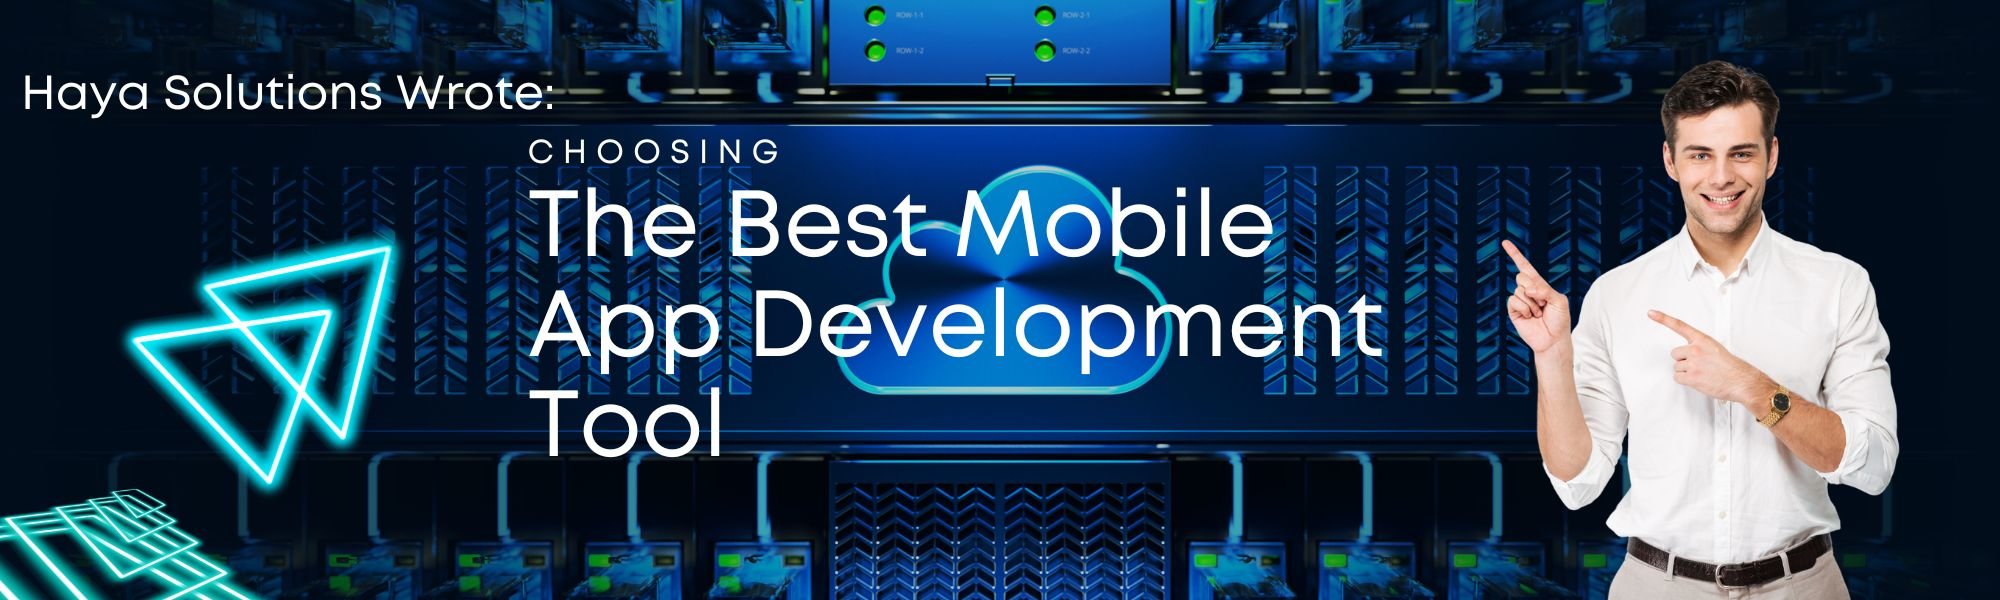 The Best Mobile App Development Tool for Your Organization